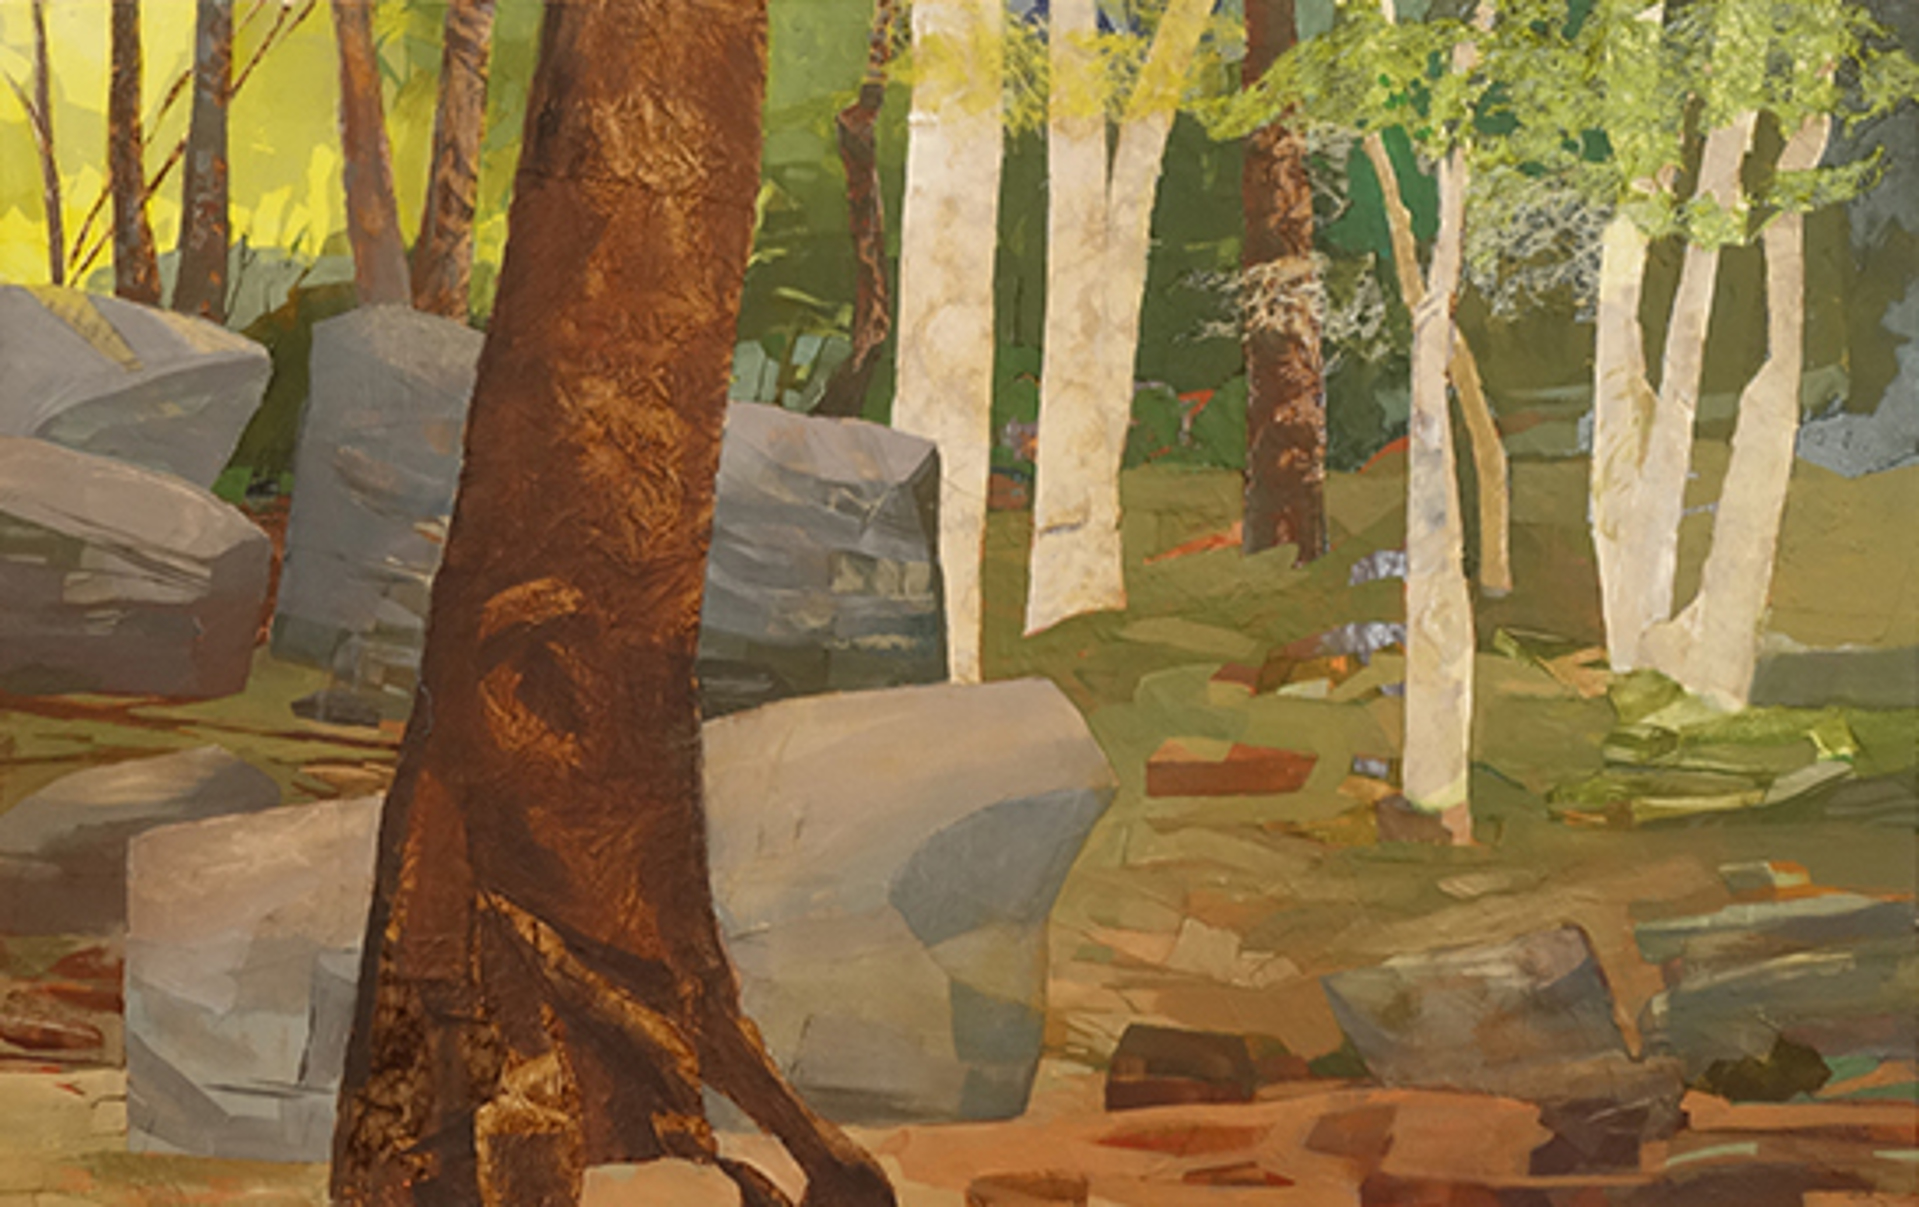 Boulders and Birches by Mariella Bisson